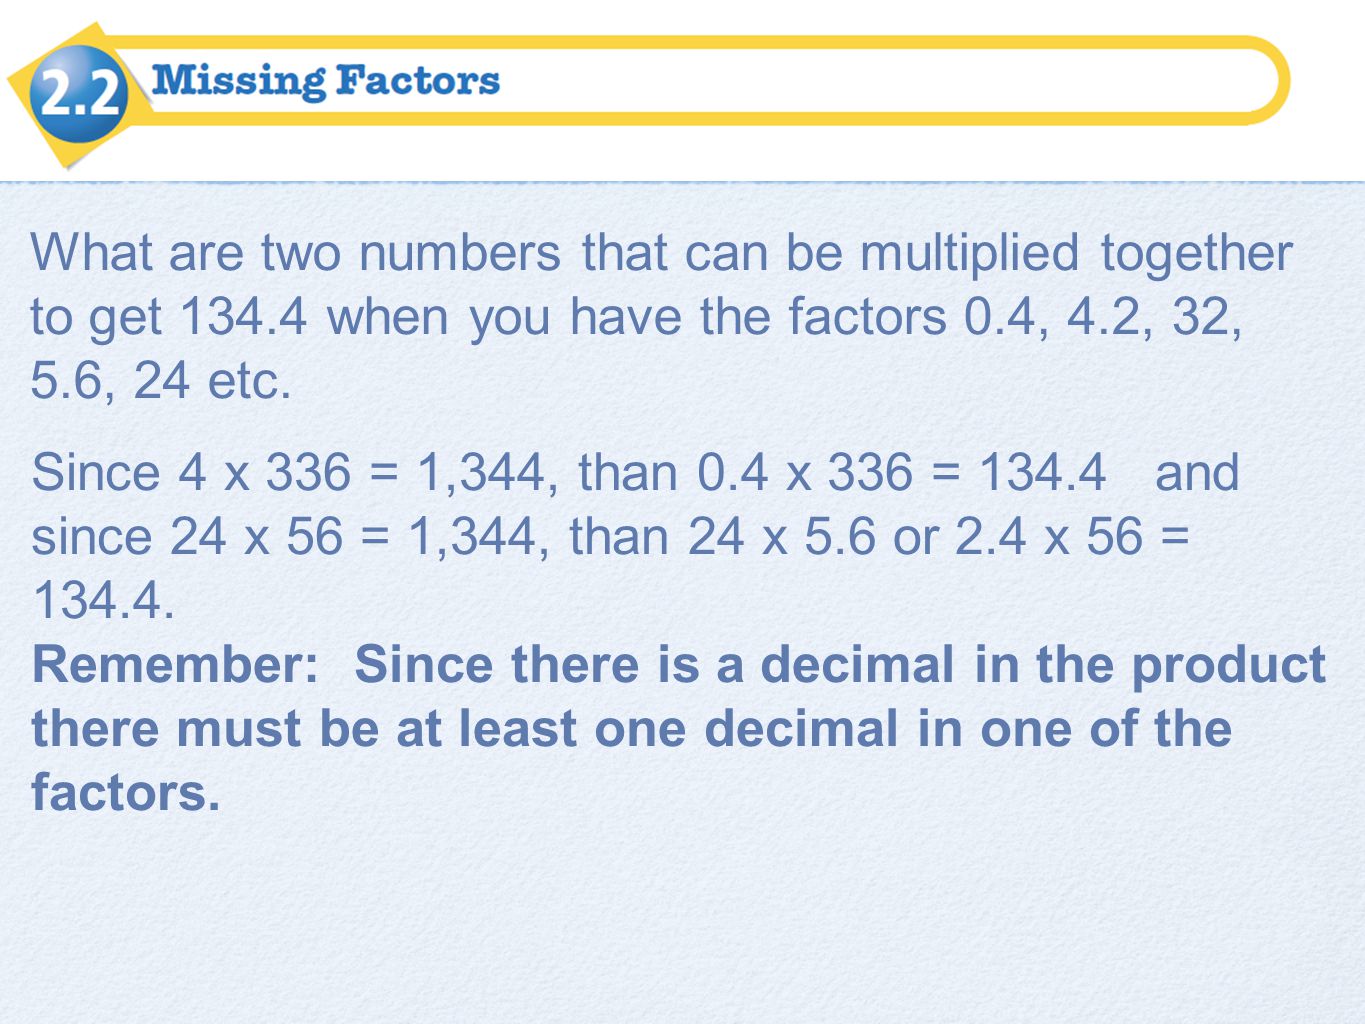 What are two numbers that can be multiplied together to get 134